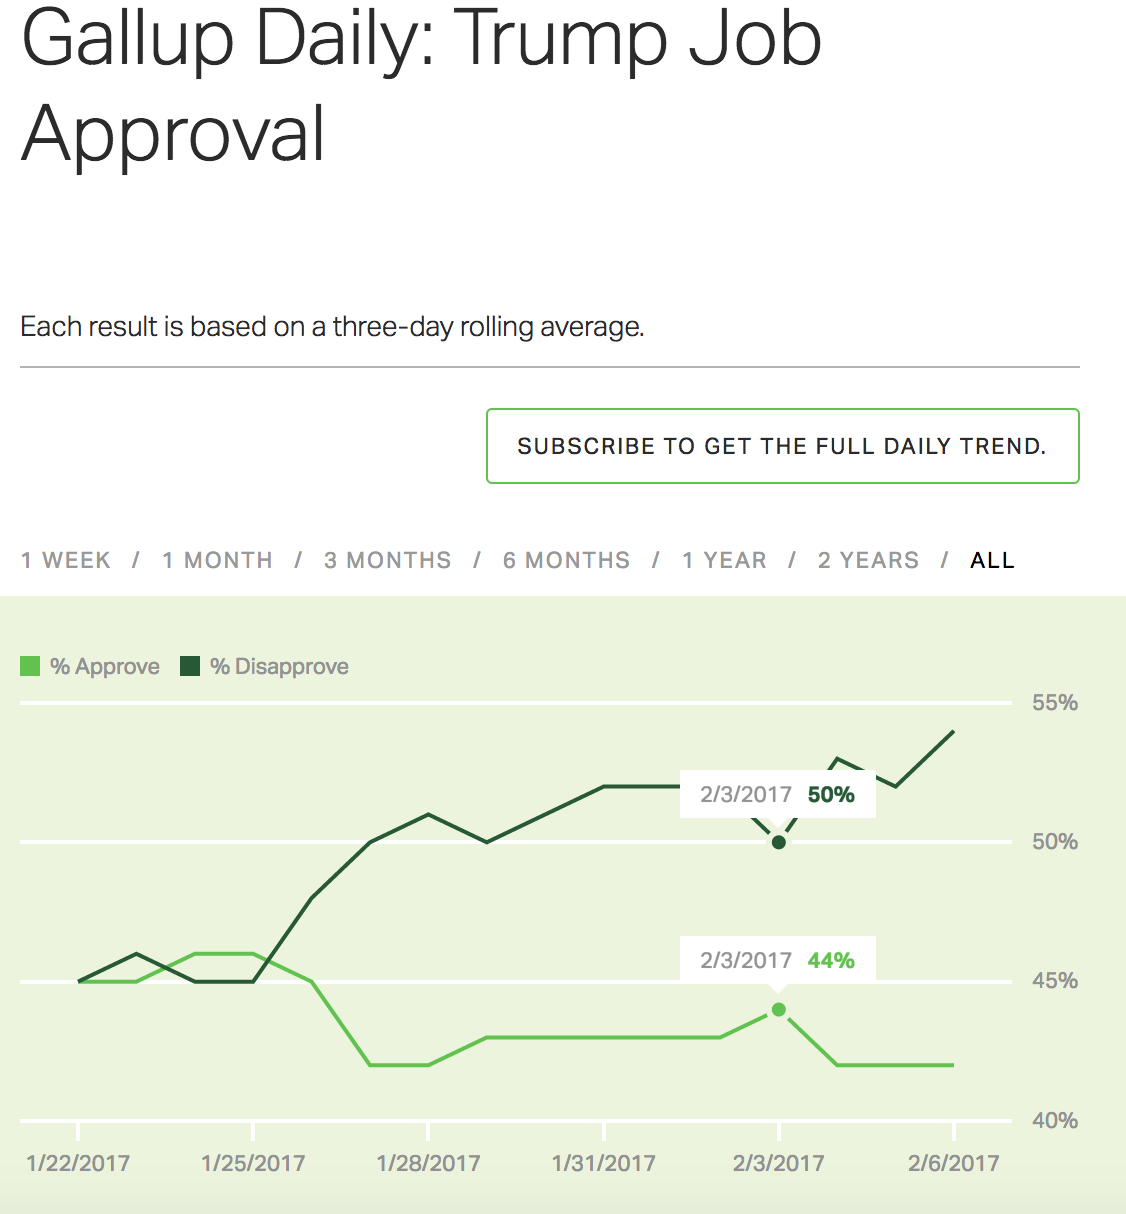 Mr Trump numbers have got steadily worse